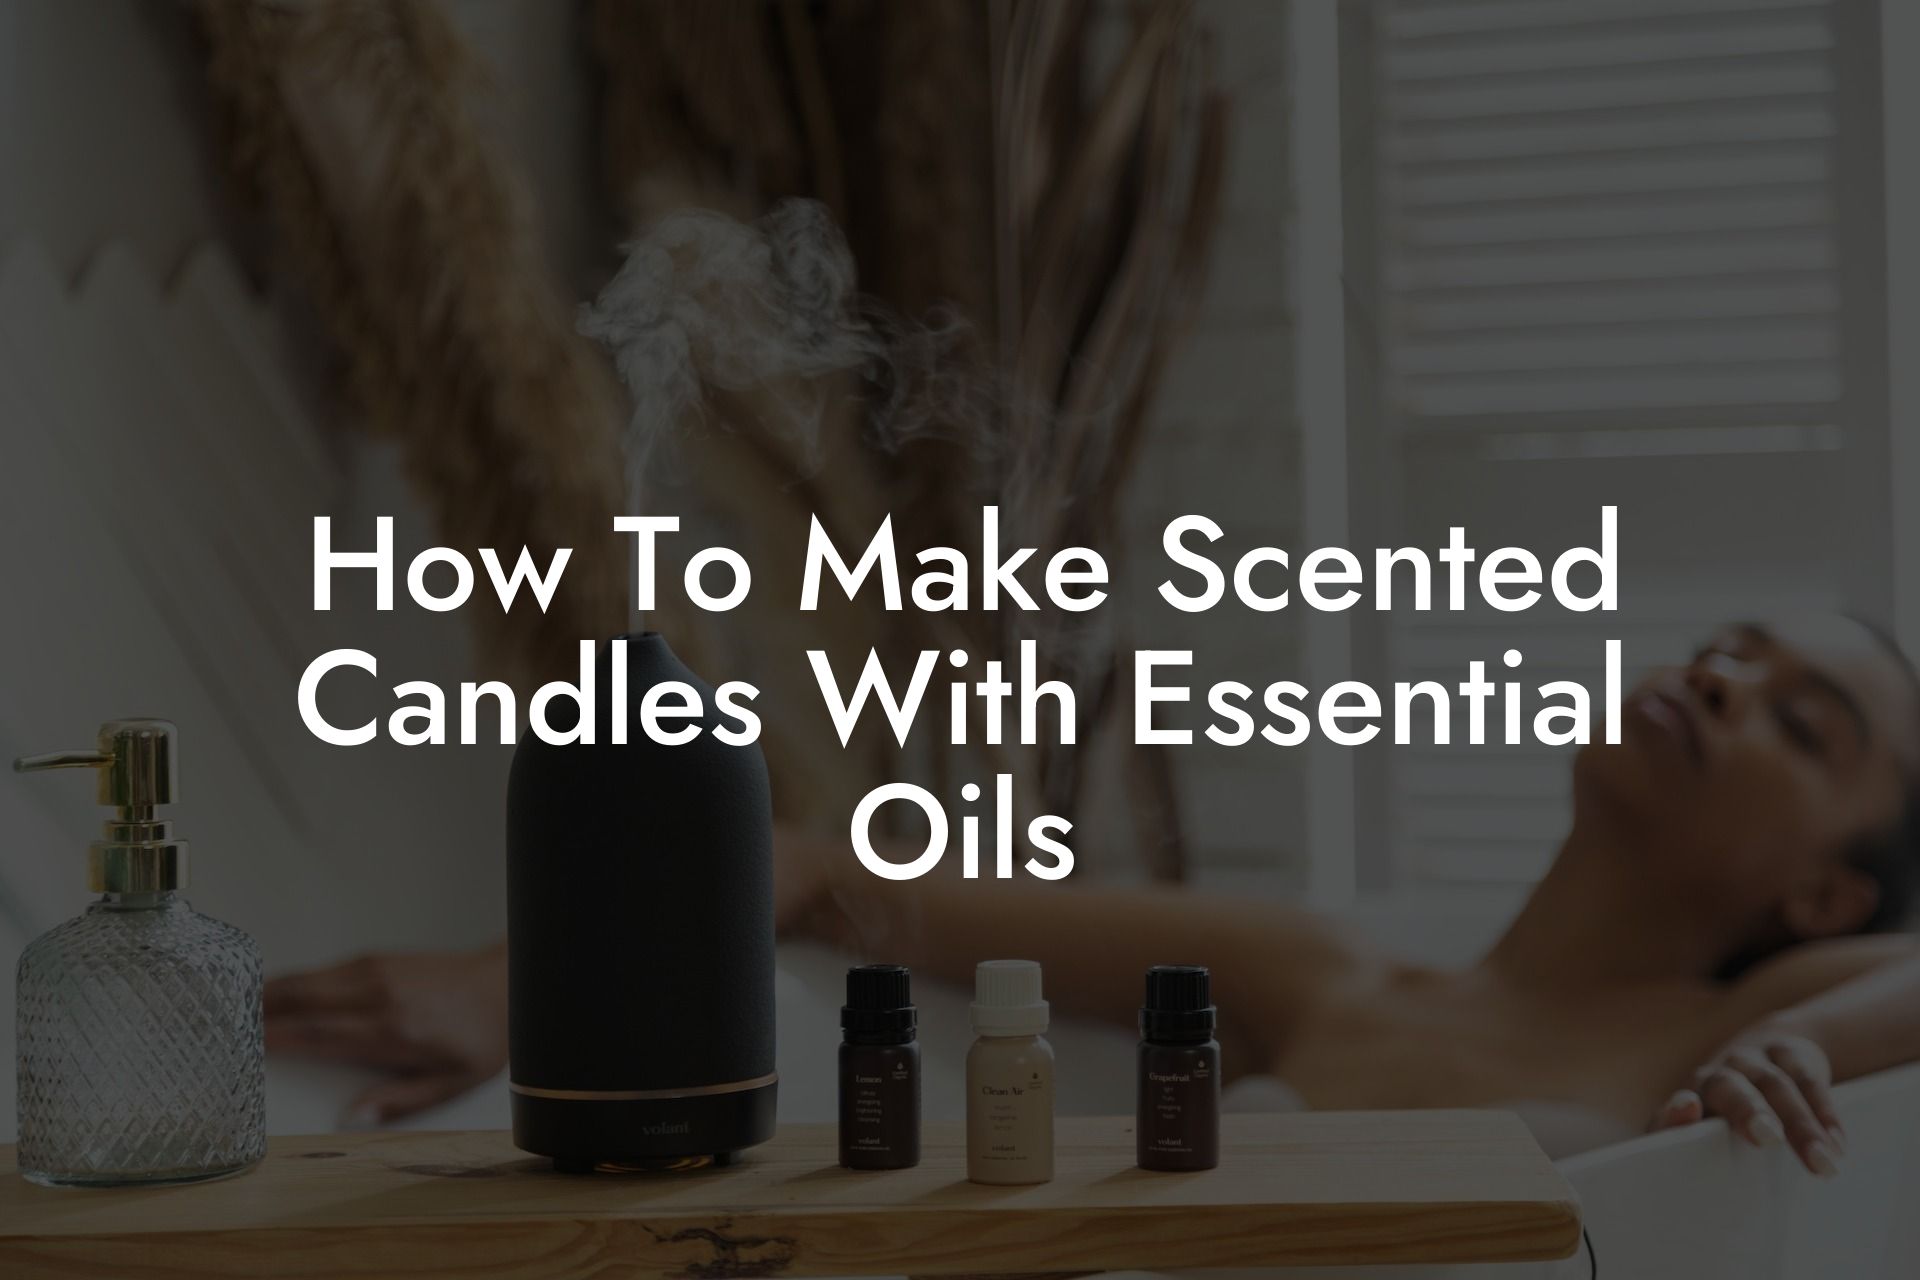 How To Make Scented Candles With Essential Oils